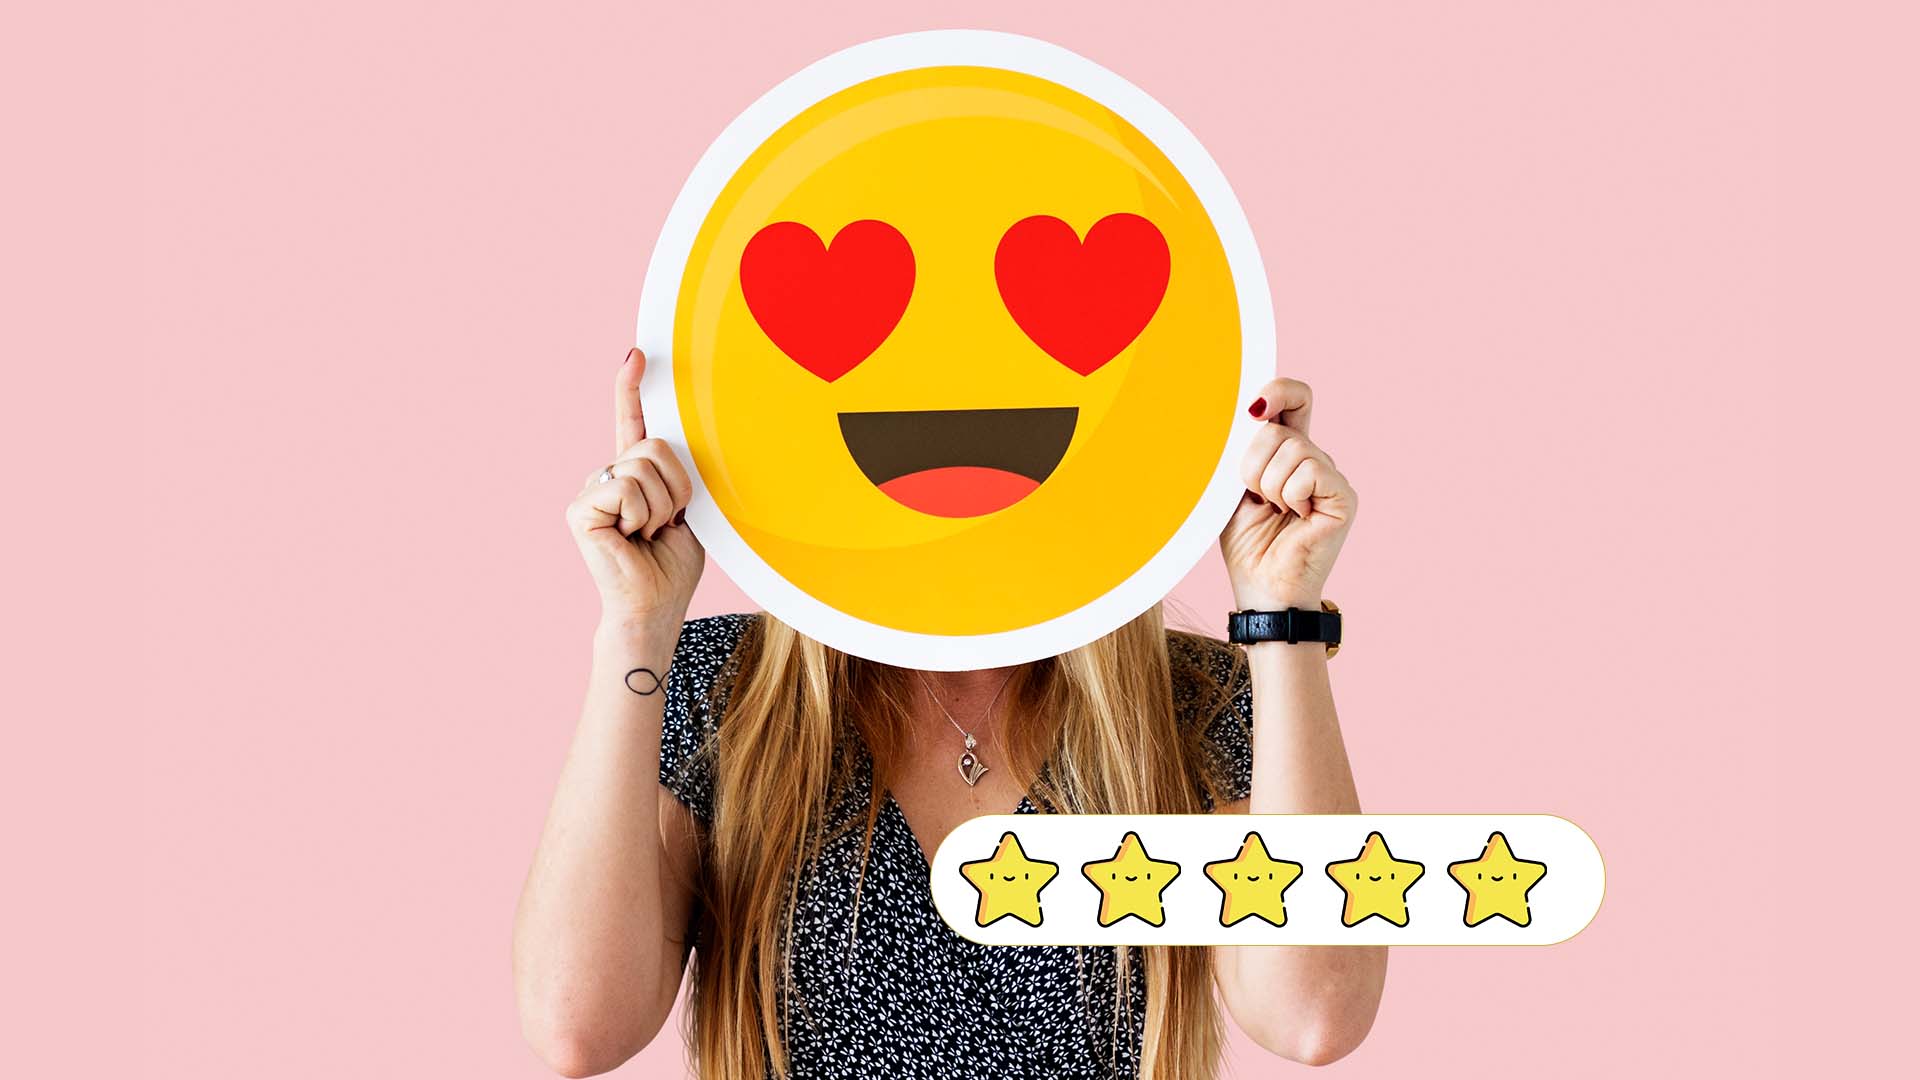 Customer Experience Isn’t A Thing, It's An Emotion